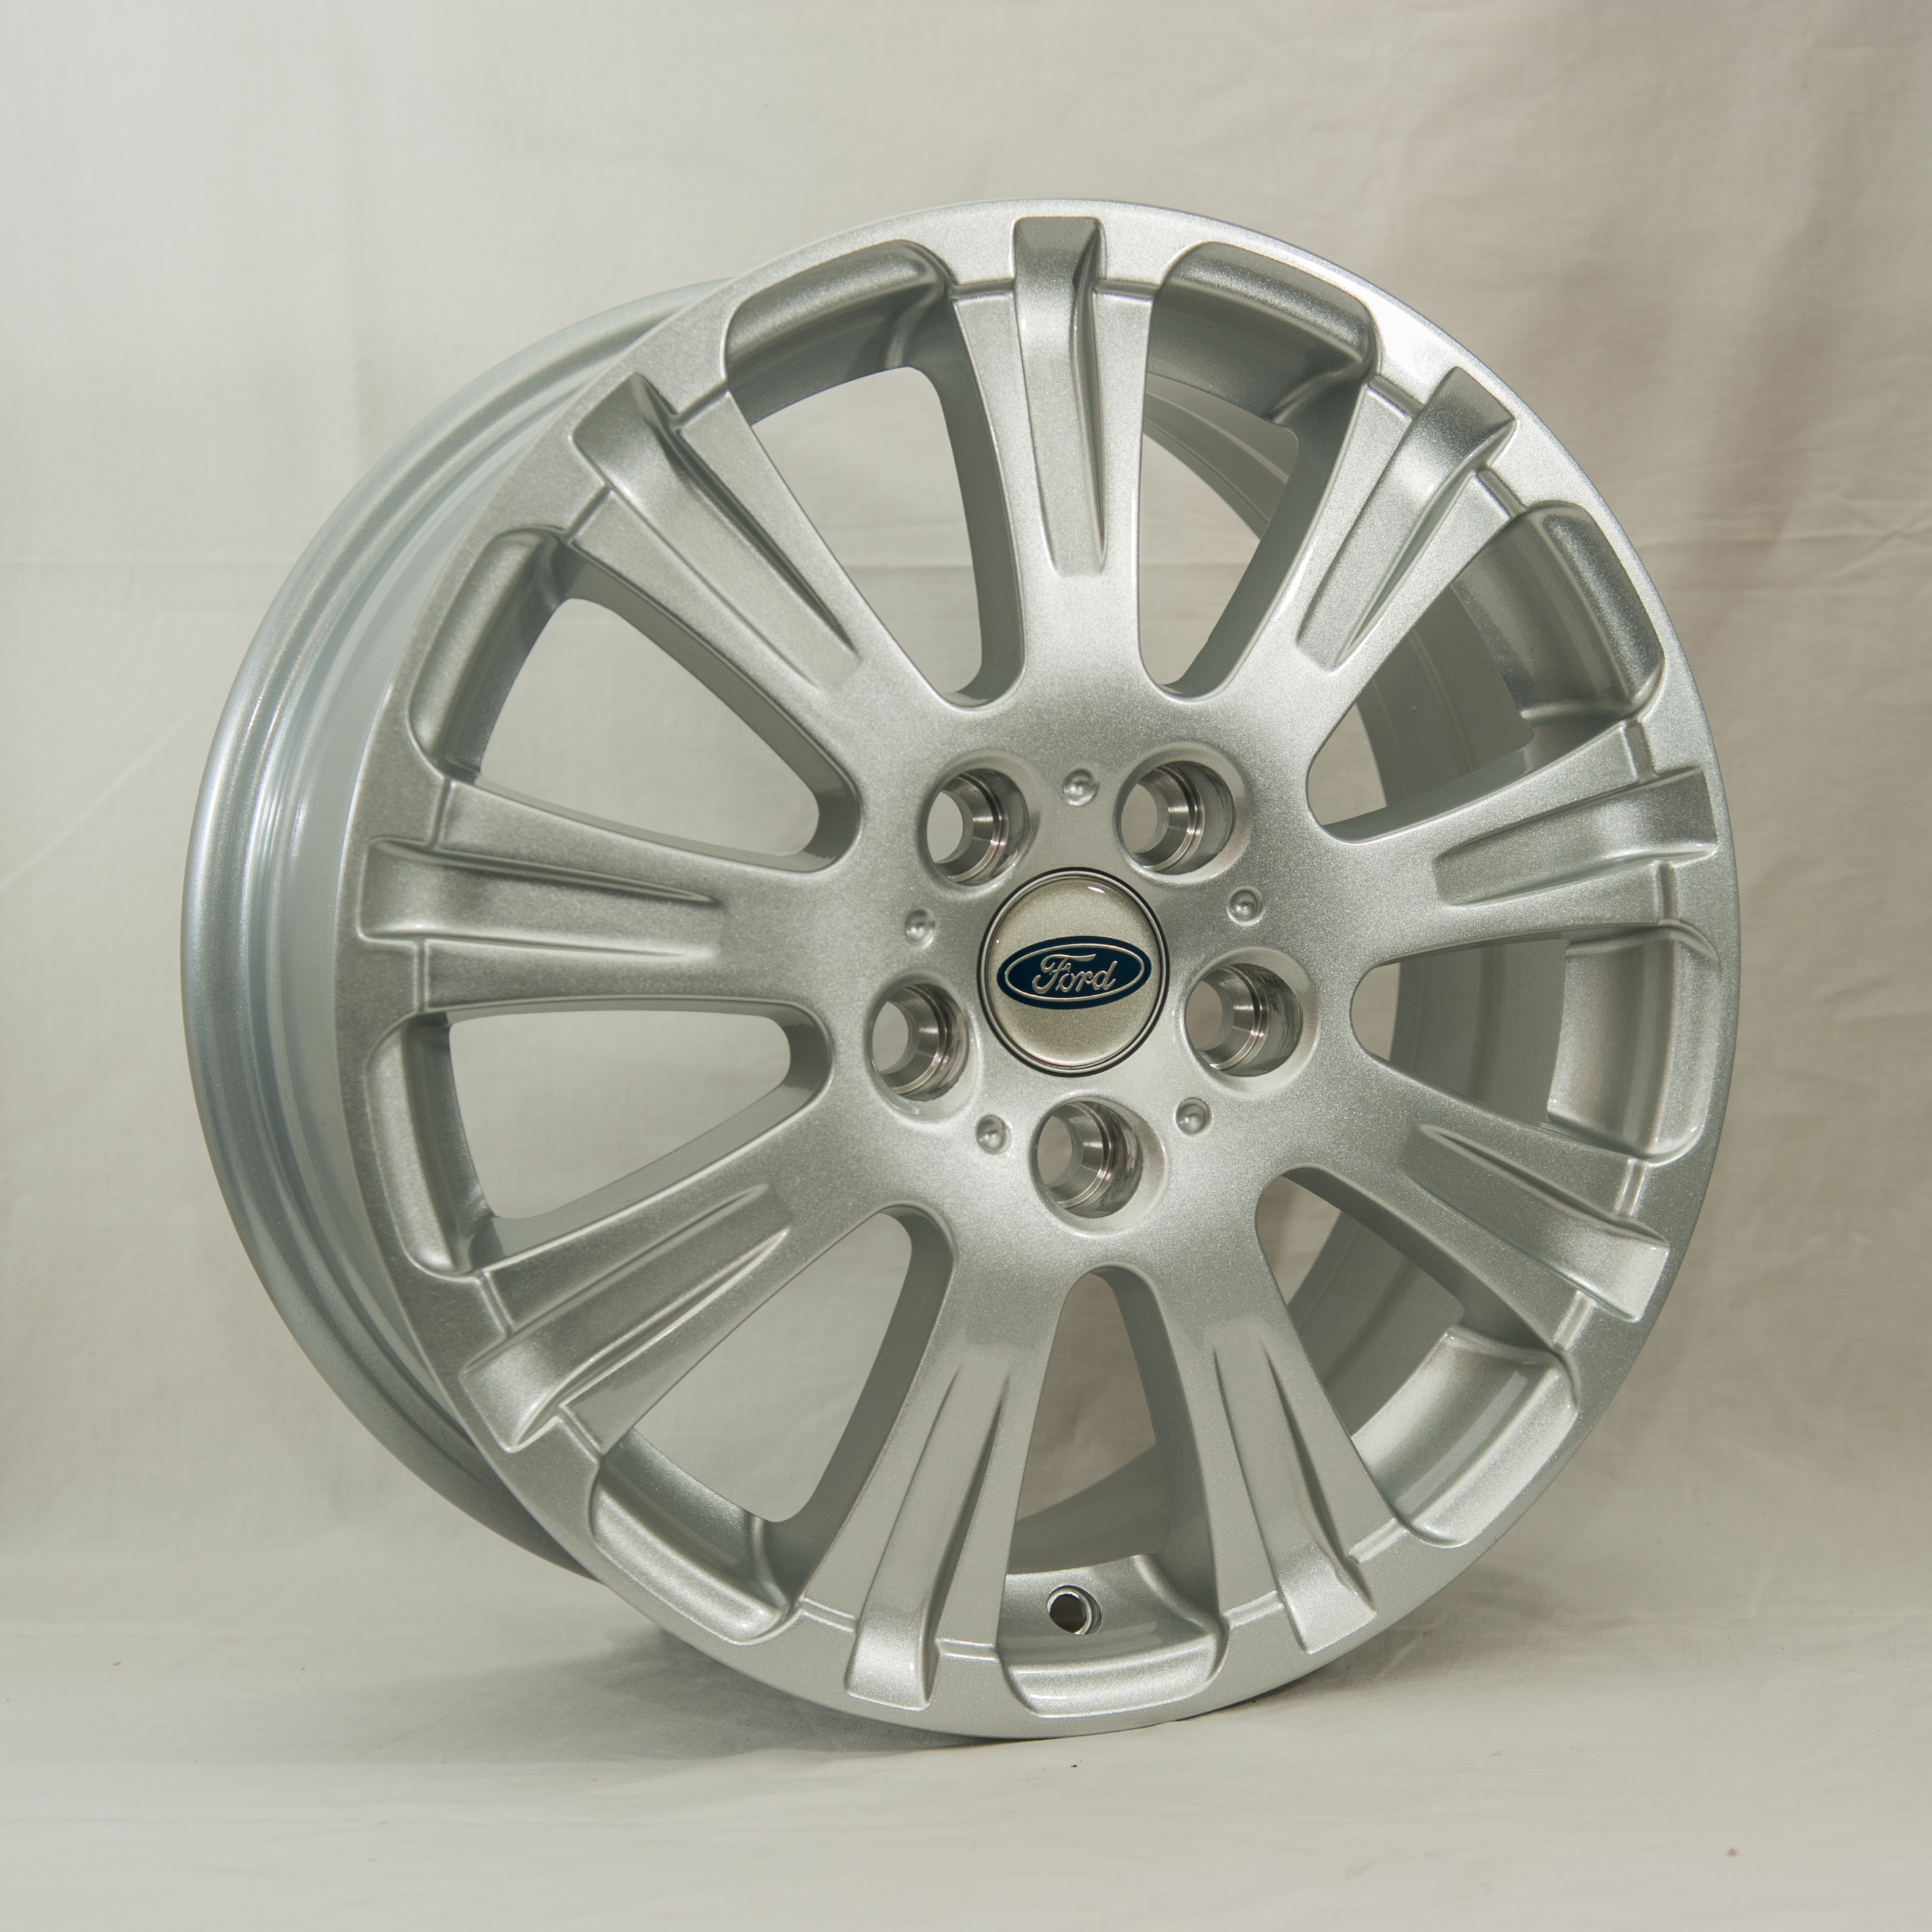 Ford GT ZY610 6.5x16 5x108 ET52.5 DIA 63.4 silver